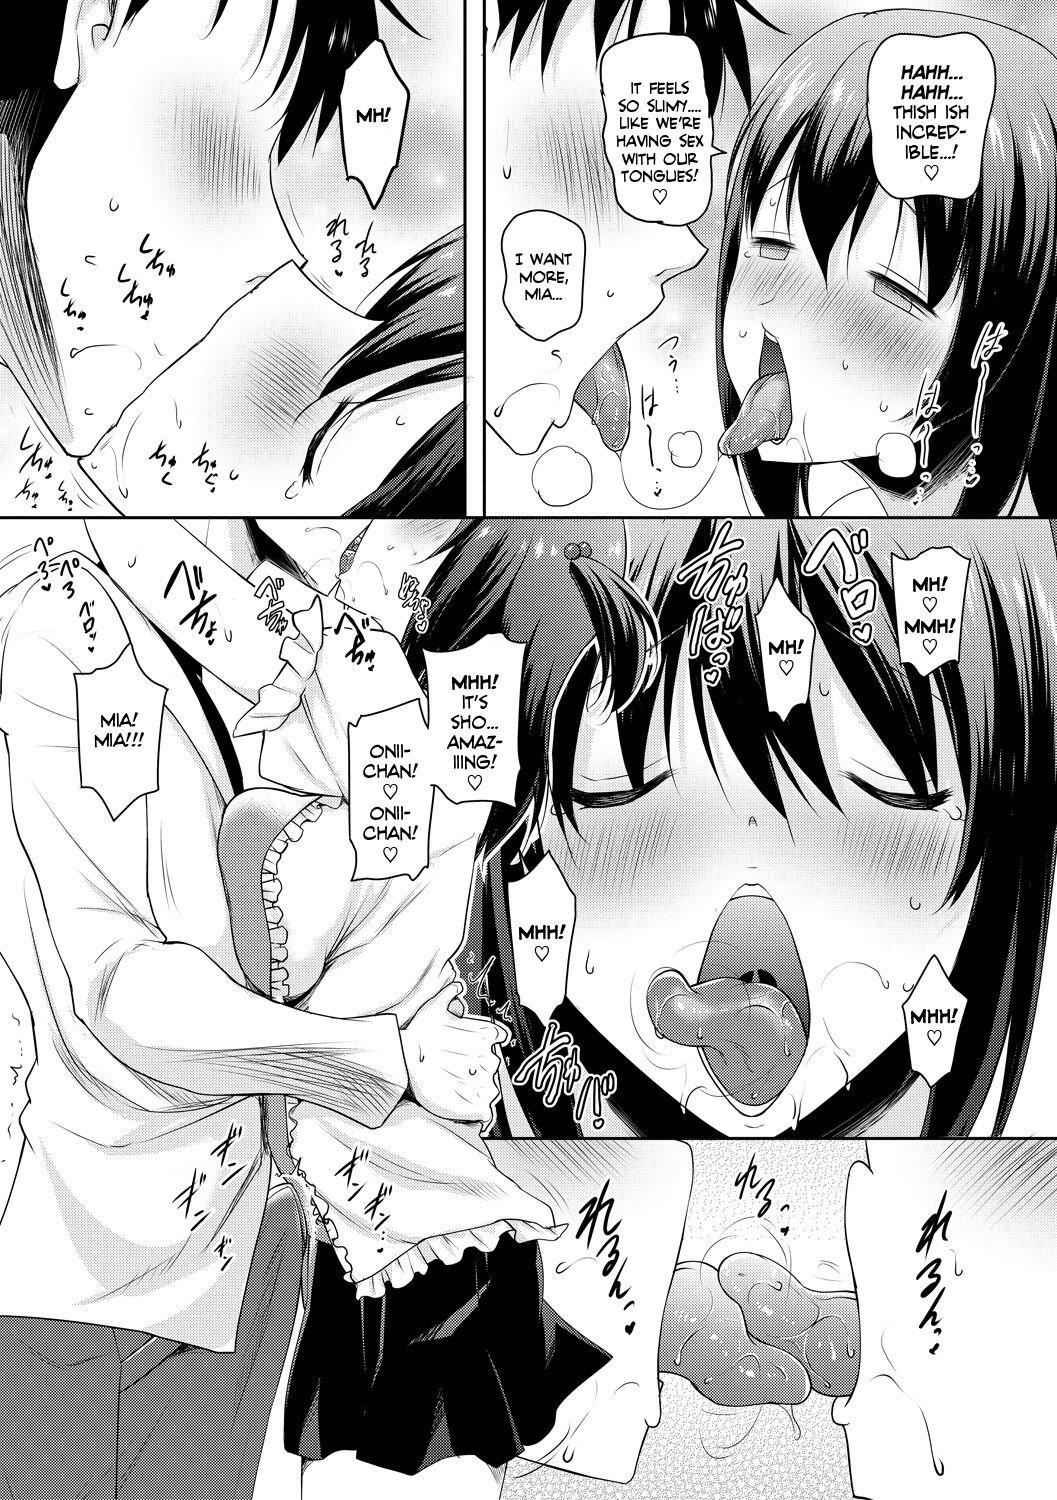 [Pony-R] I Can't Live Without My Little Sister's Tongue Chapter 01-02 + Secret Baby-making Sex with a Big-titted Mother and Daughter! (Kyonyuu Oyako no Shita to Shikyuu ni Renzoku Shasei) [English] [Team Rabu2] [Digital] 12